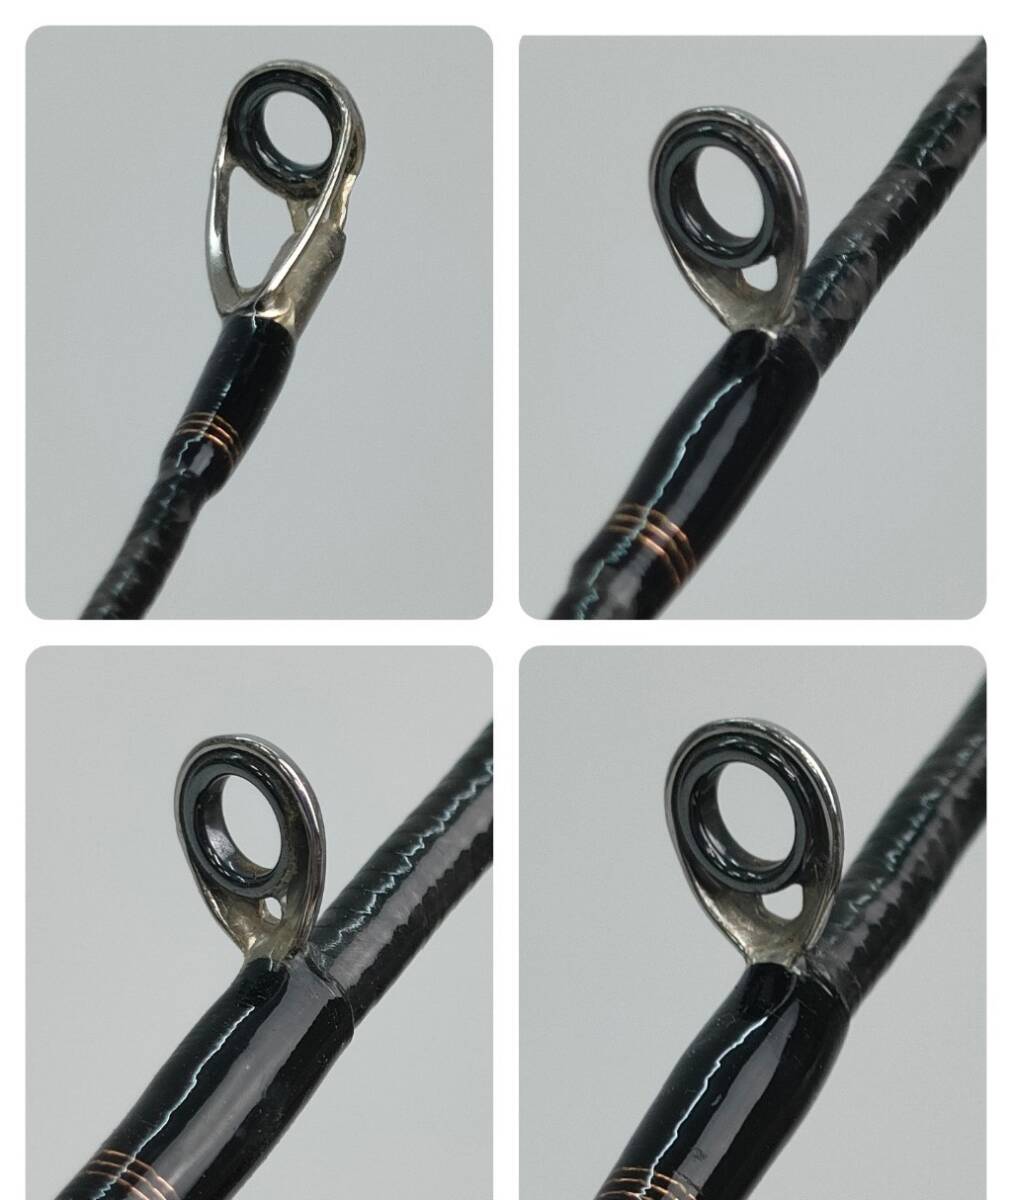 S5602*1 jpy ~[DAIWA] Daiwa REBELLION 6101MHRBlibeli on one-piece bait rod fishing fishing rod fishing gear storage sack equipped secondhand goods including in a package un- possible 